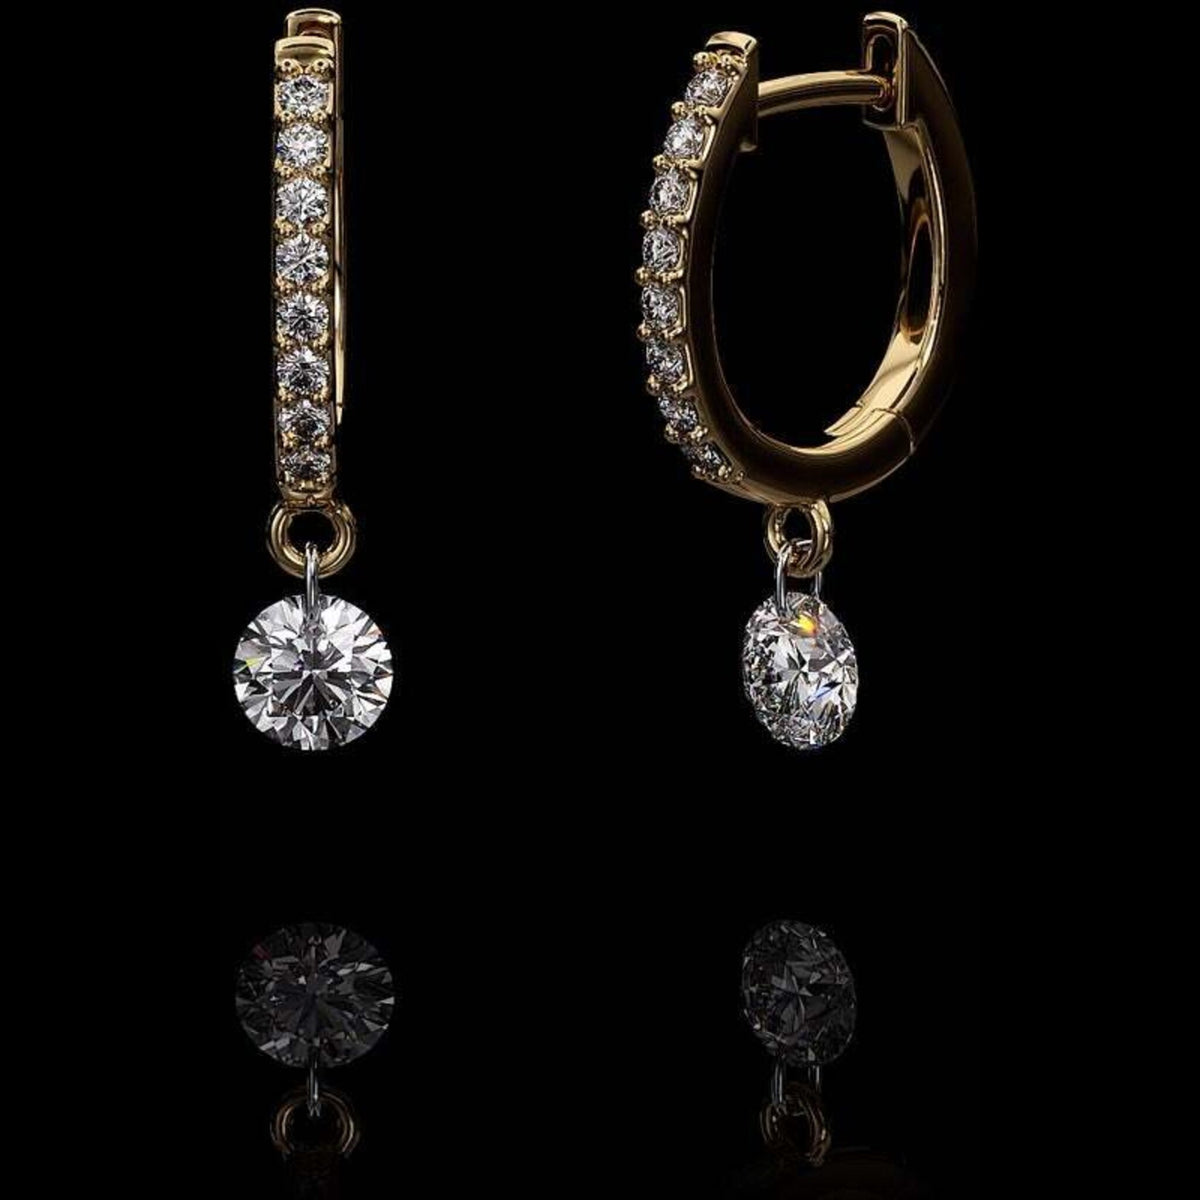 Aresa New York - Beauvoir No. 1 Earrings - 18K Yellow Gold with 0.50 cts. of Diamonds